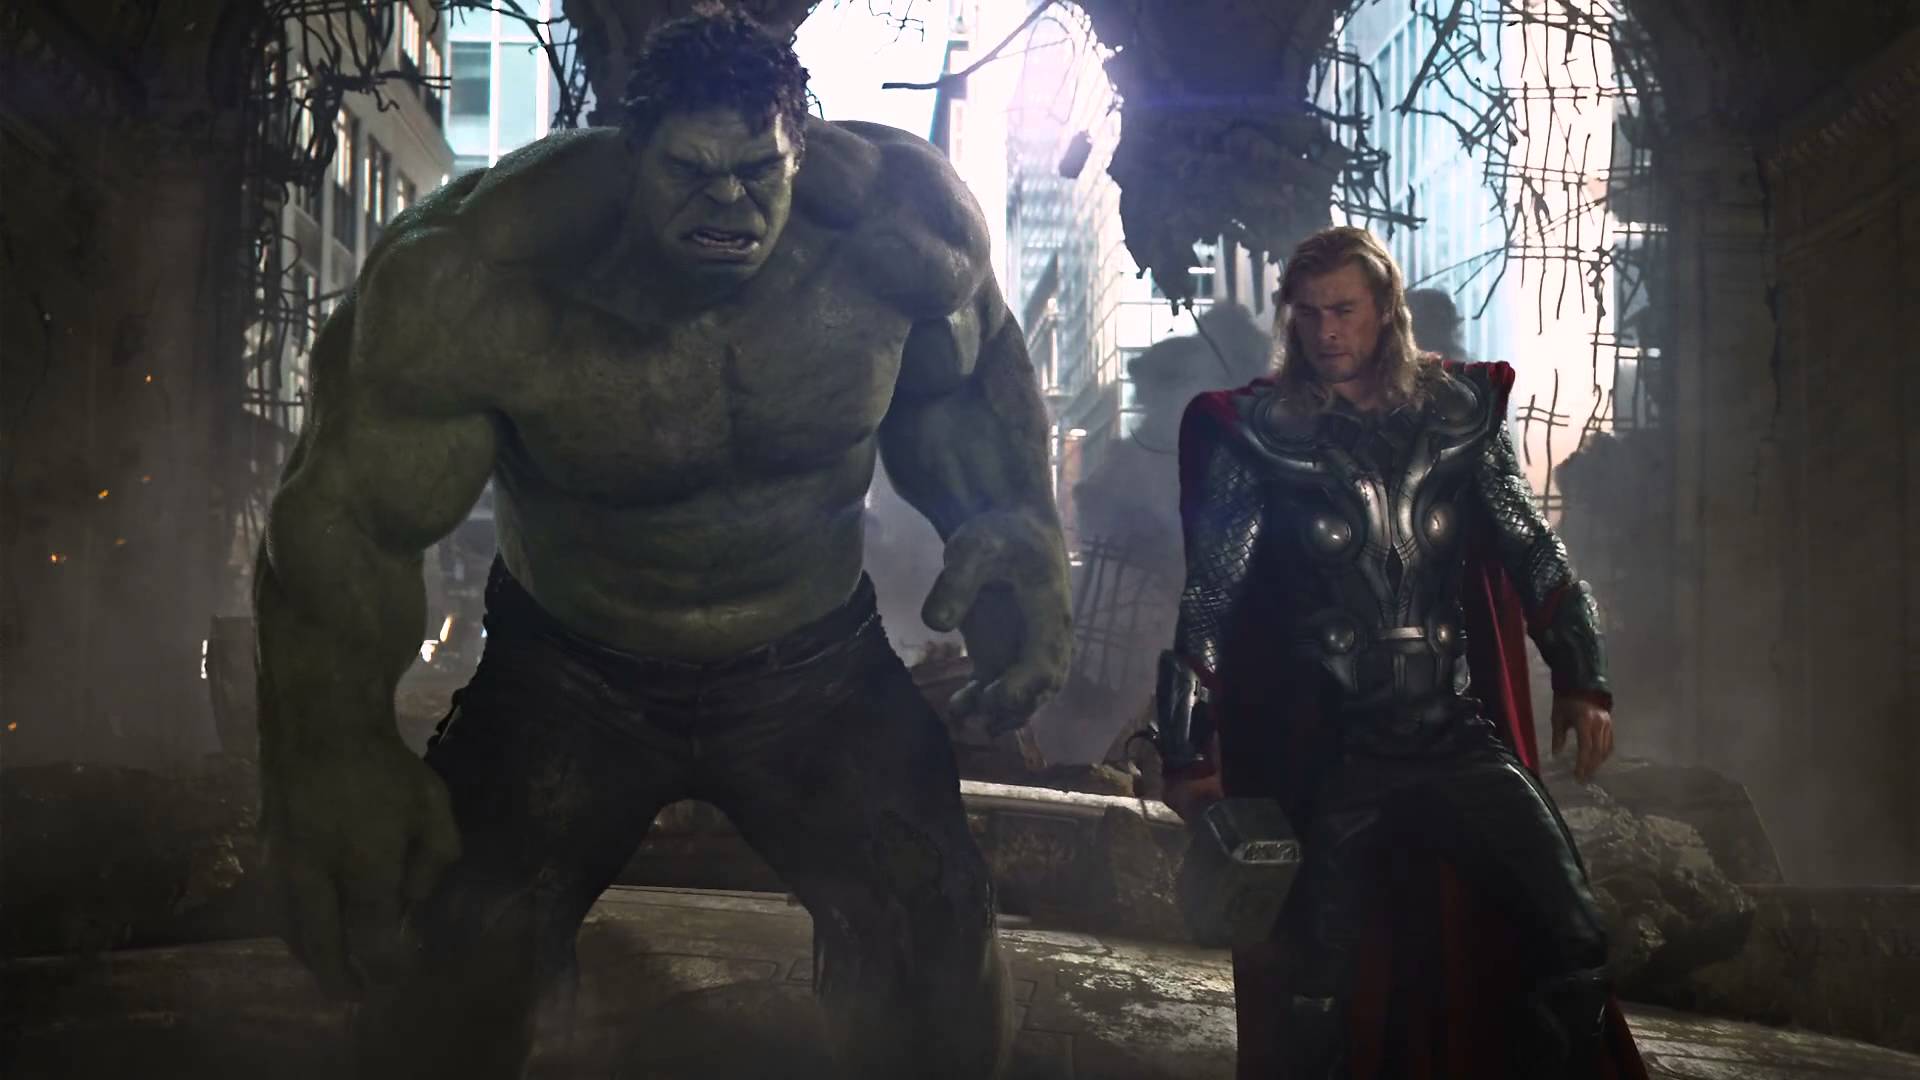 The Hulk Is Officially Joining Thor: Ragnarok, Things Are about to Get Weird